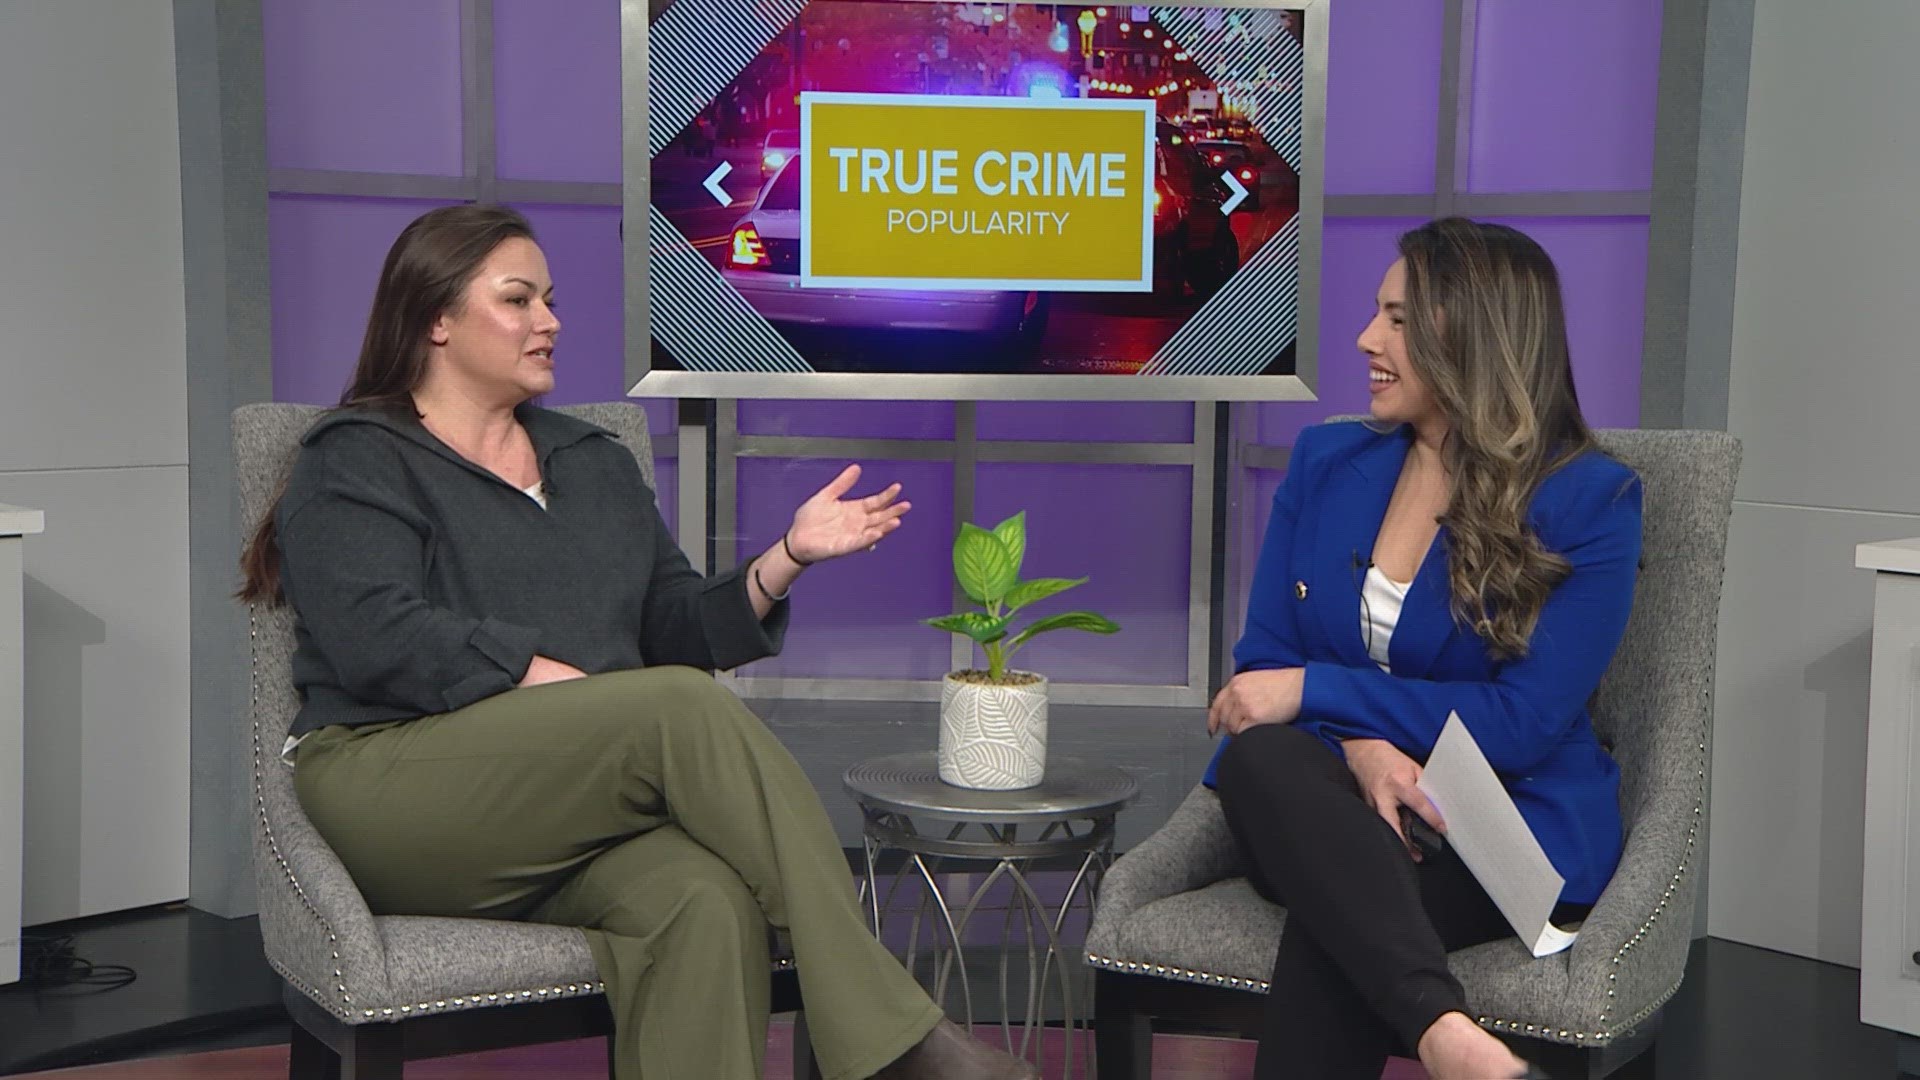 University of Colorado assistant professor Amber McDonald digs into the popularity of true crime and why people are so fascinated with it.